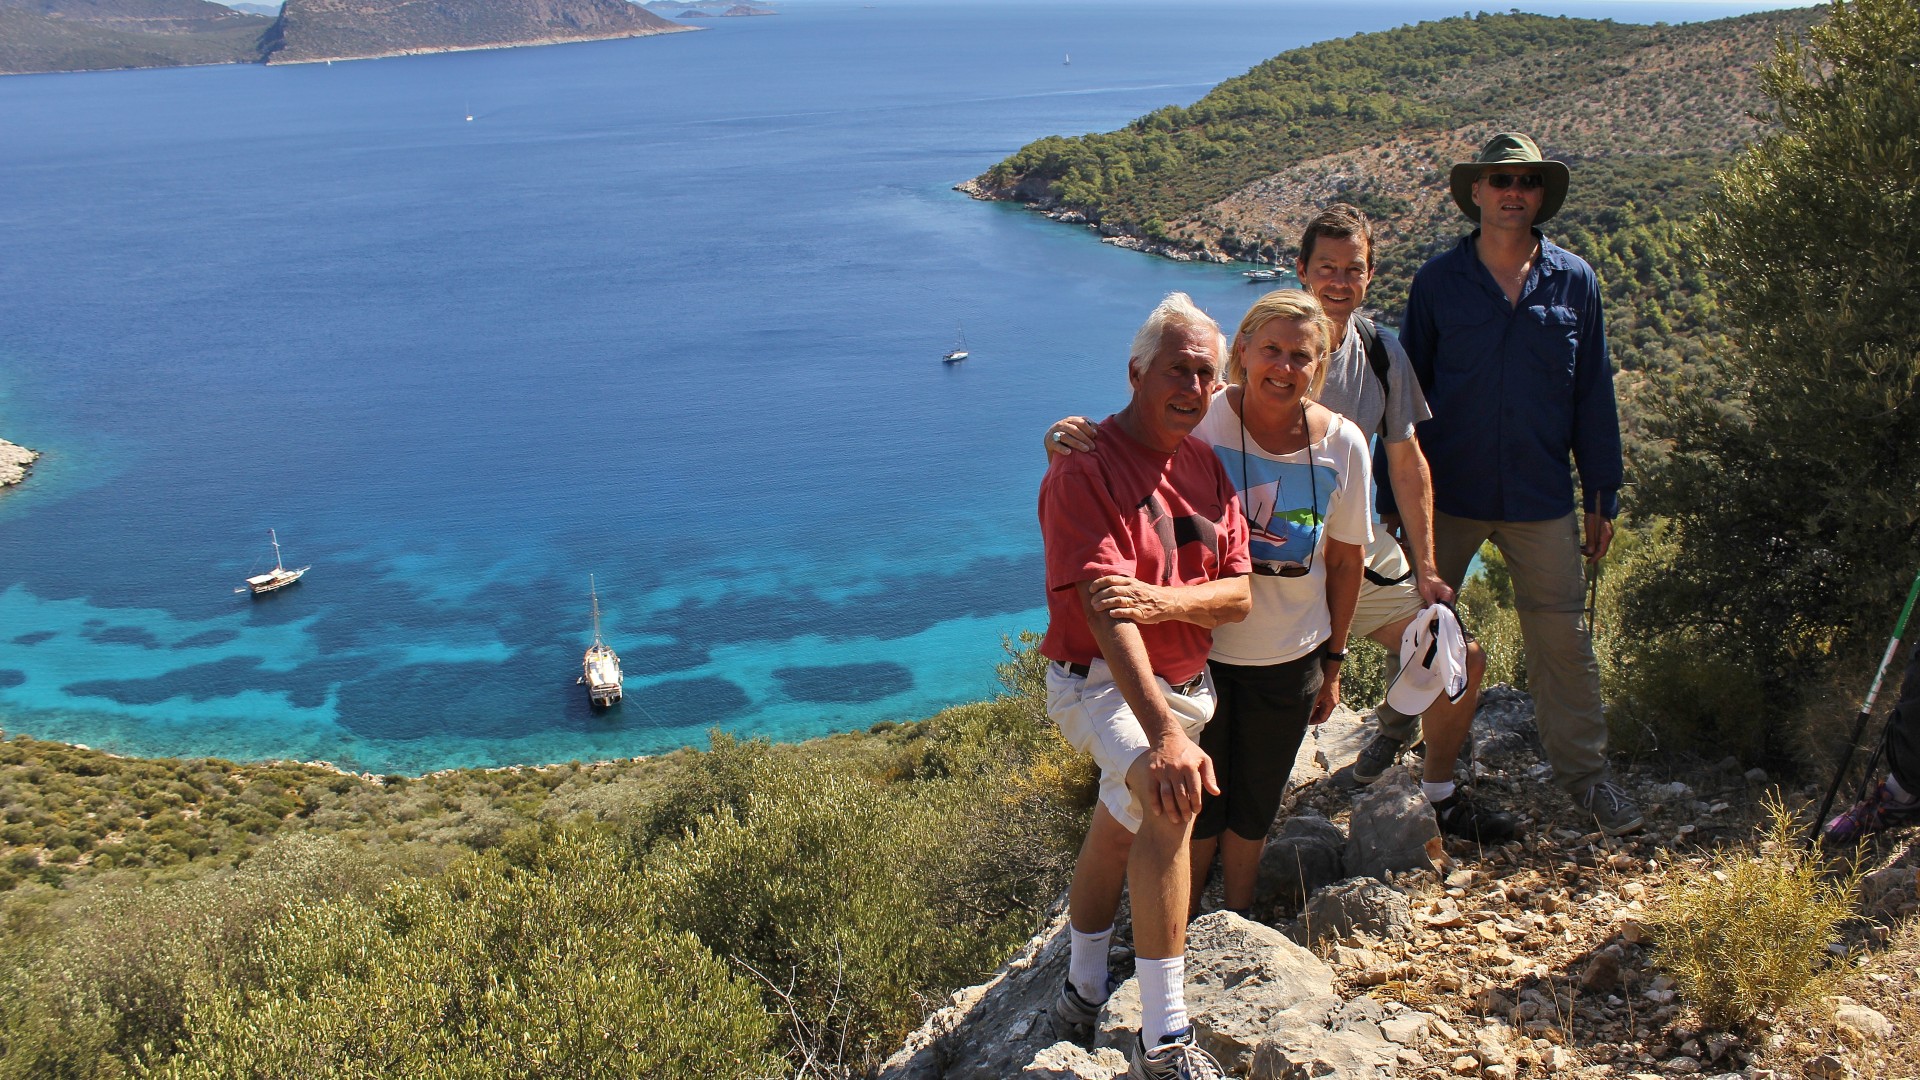 Hikers smiling at the viewpoint on their hike in Turkey